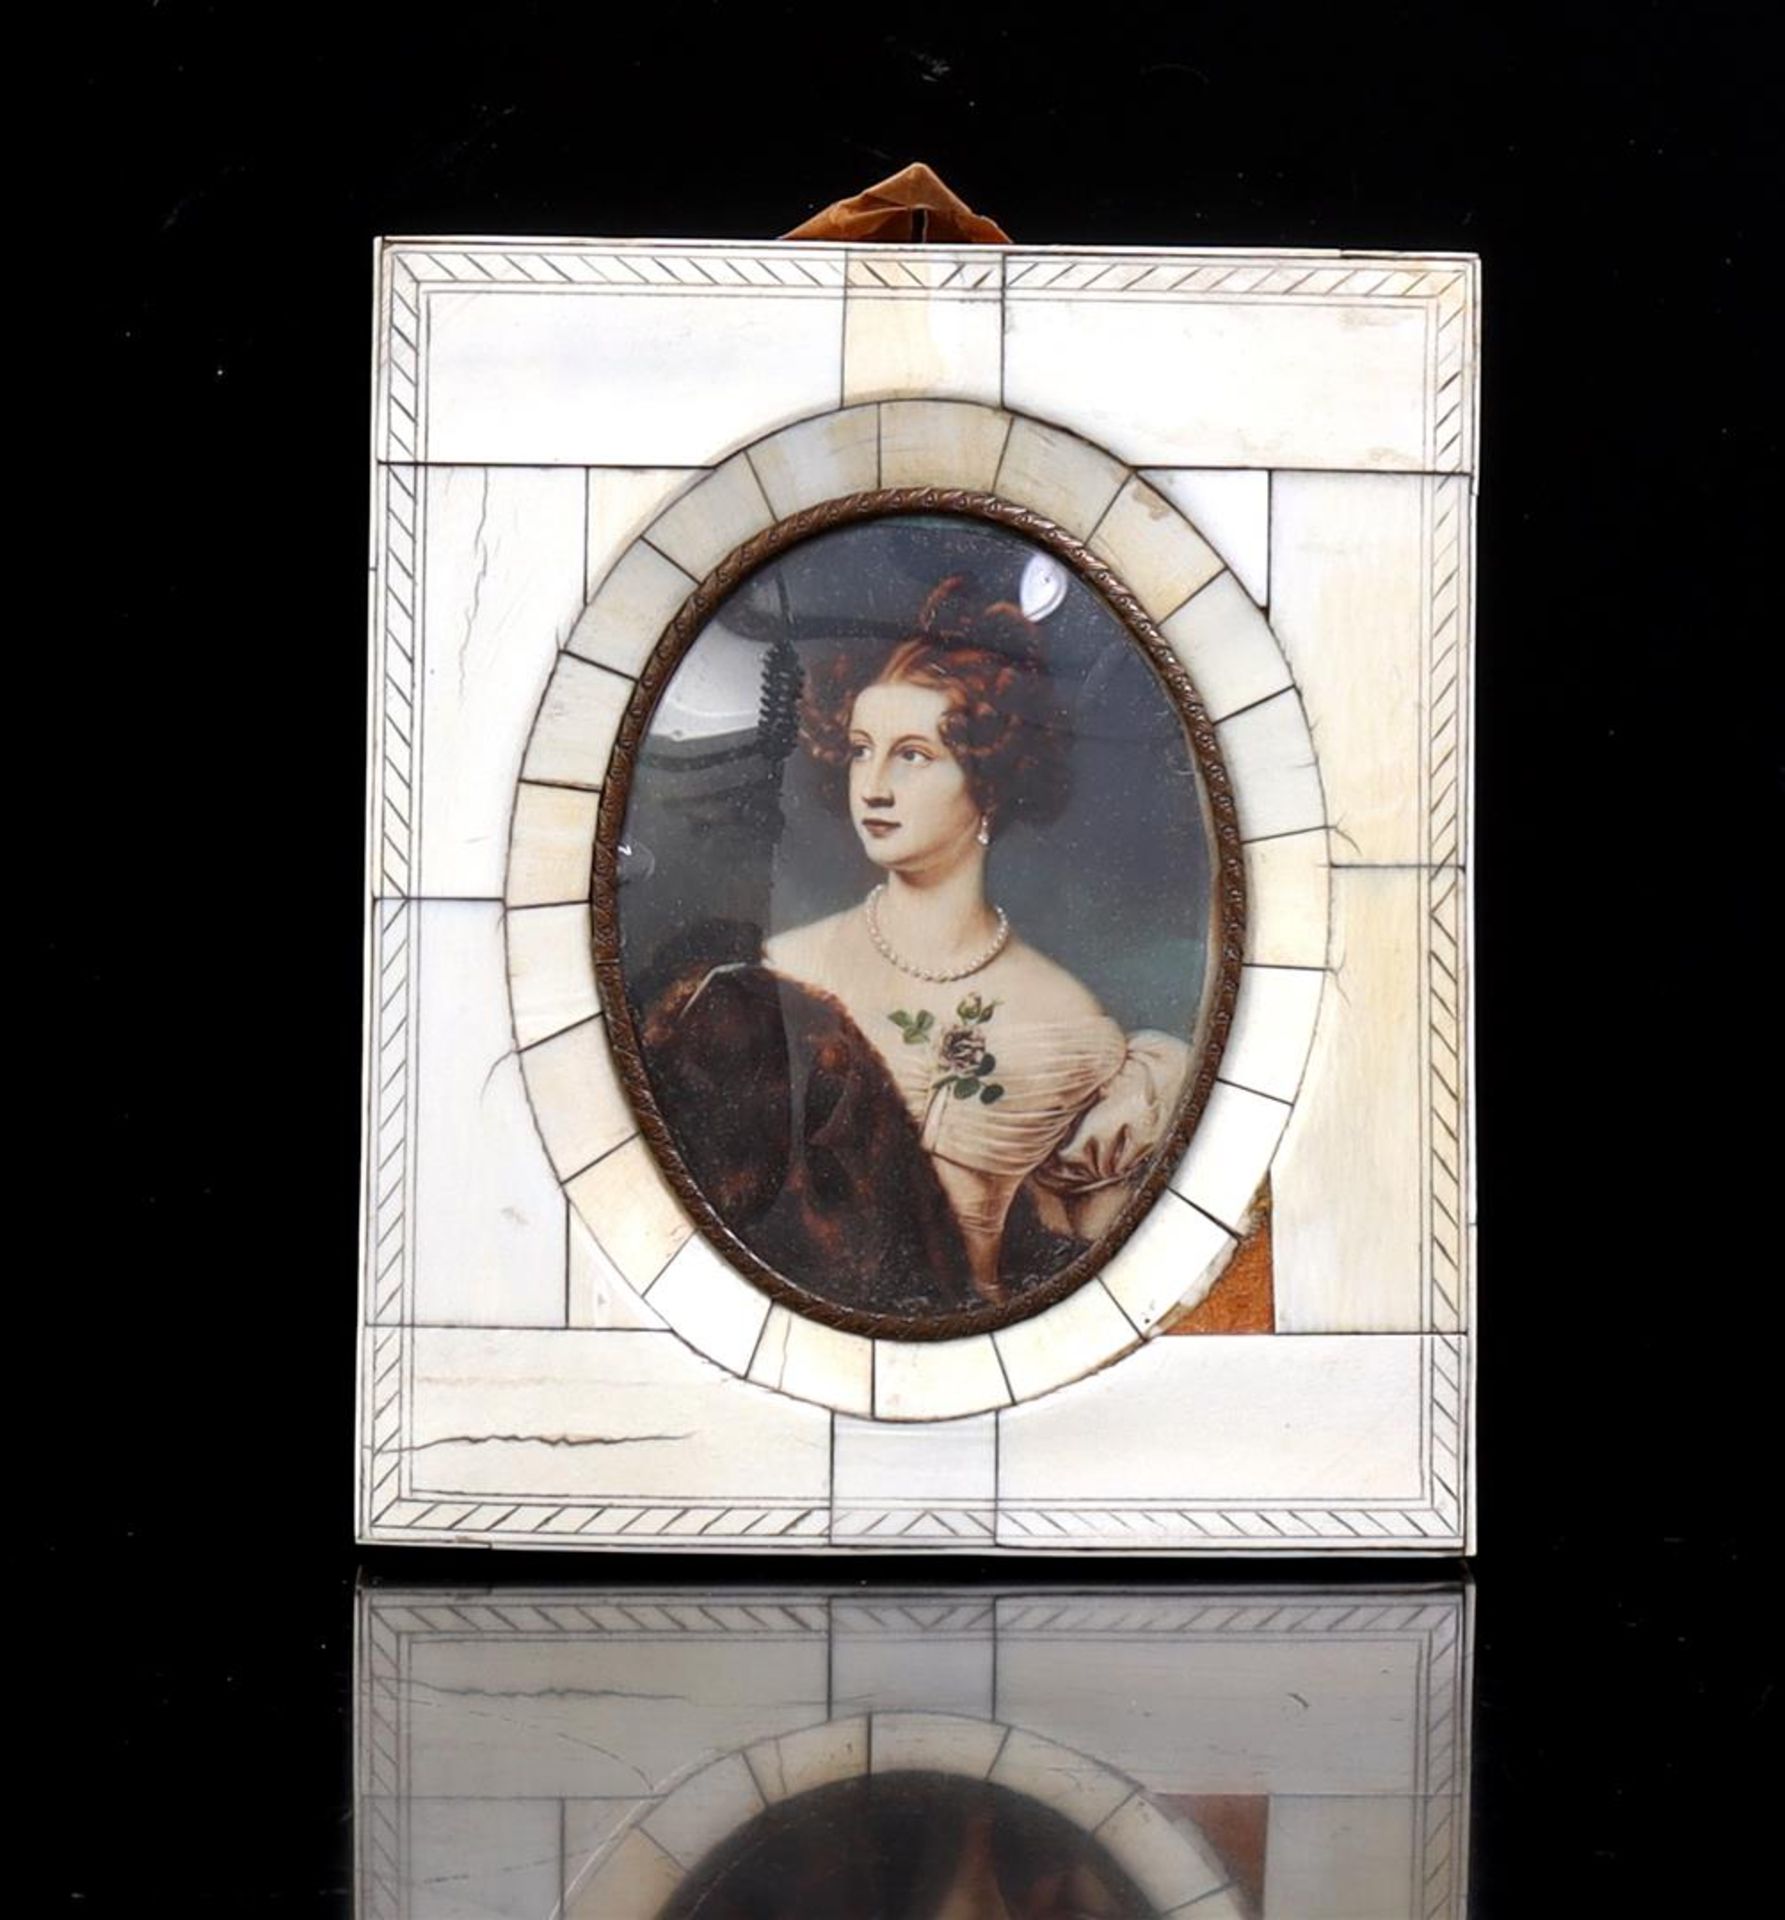 Oval portrait of a posing lady 8x6 cm, in ivory frame, around 1900, outer dimensions 13.5x11.5 cm (p